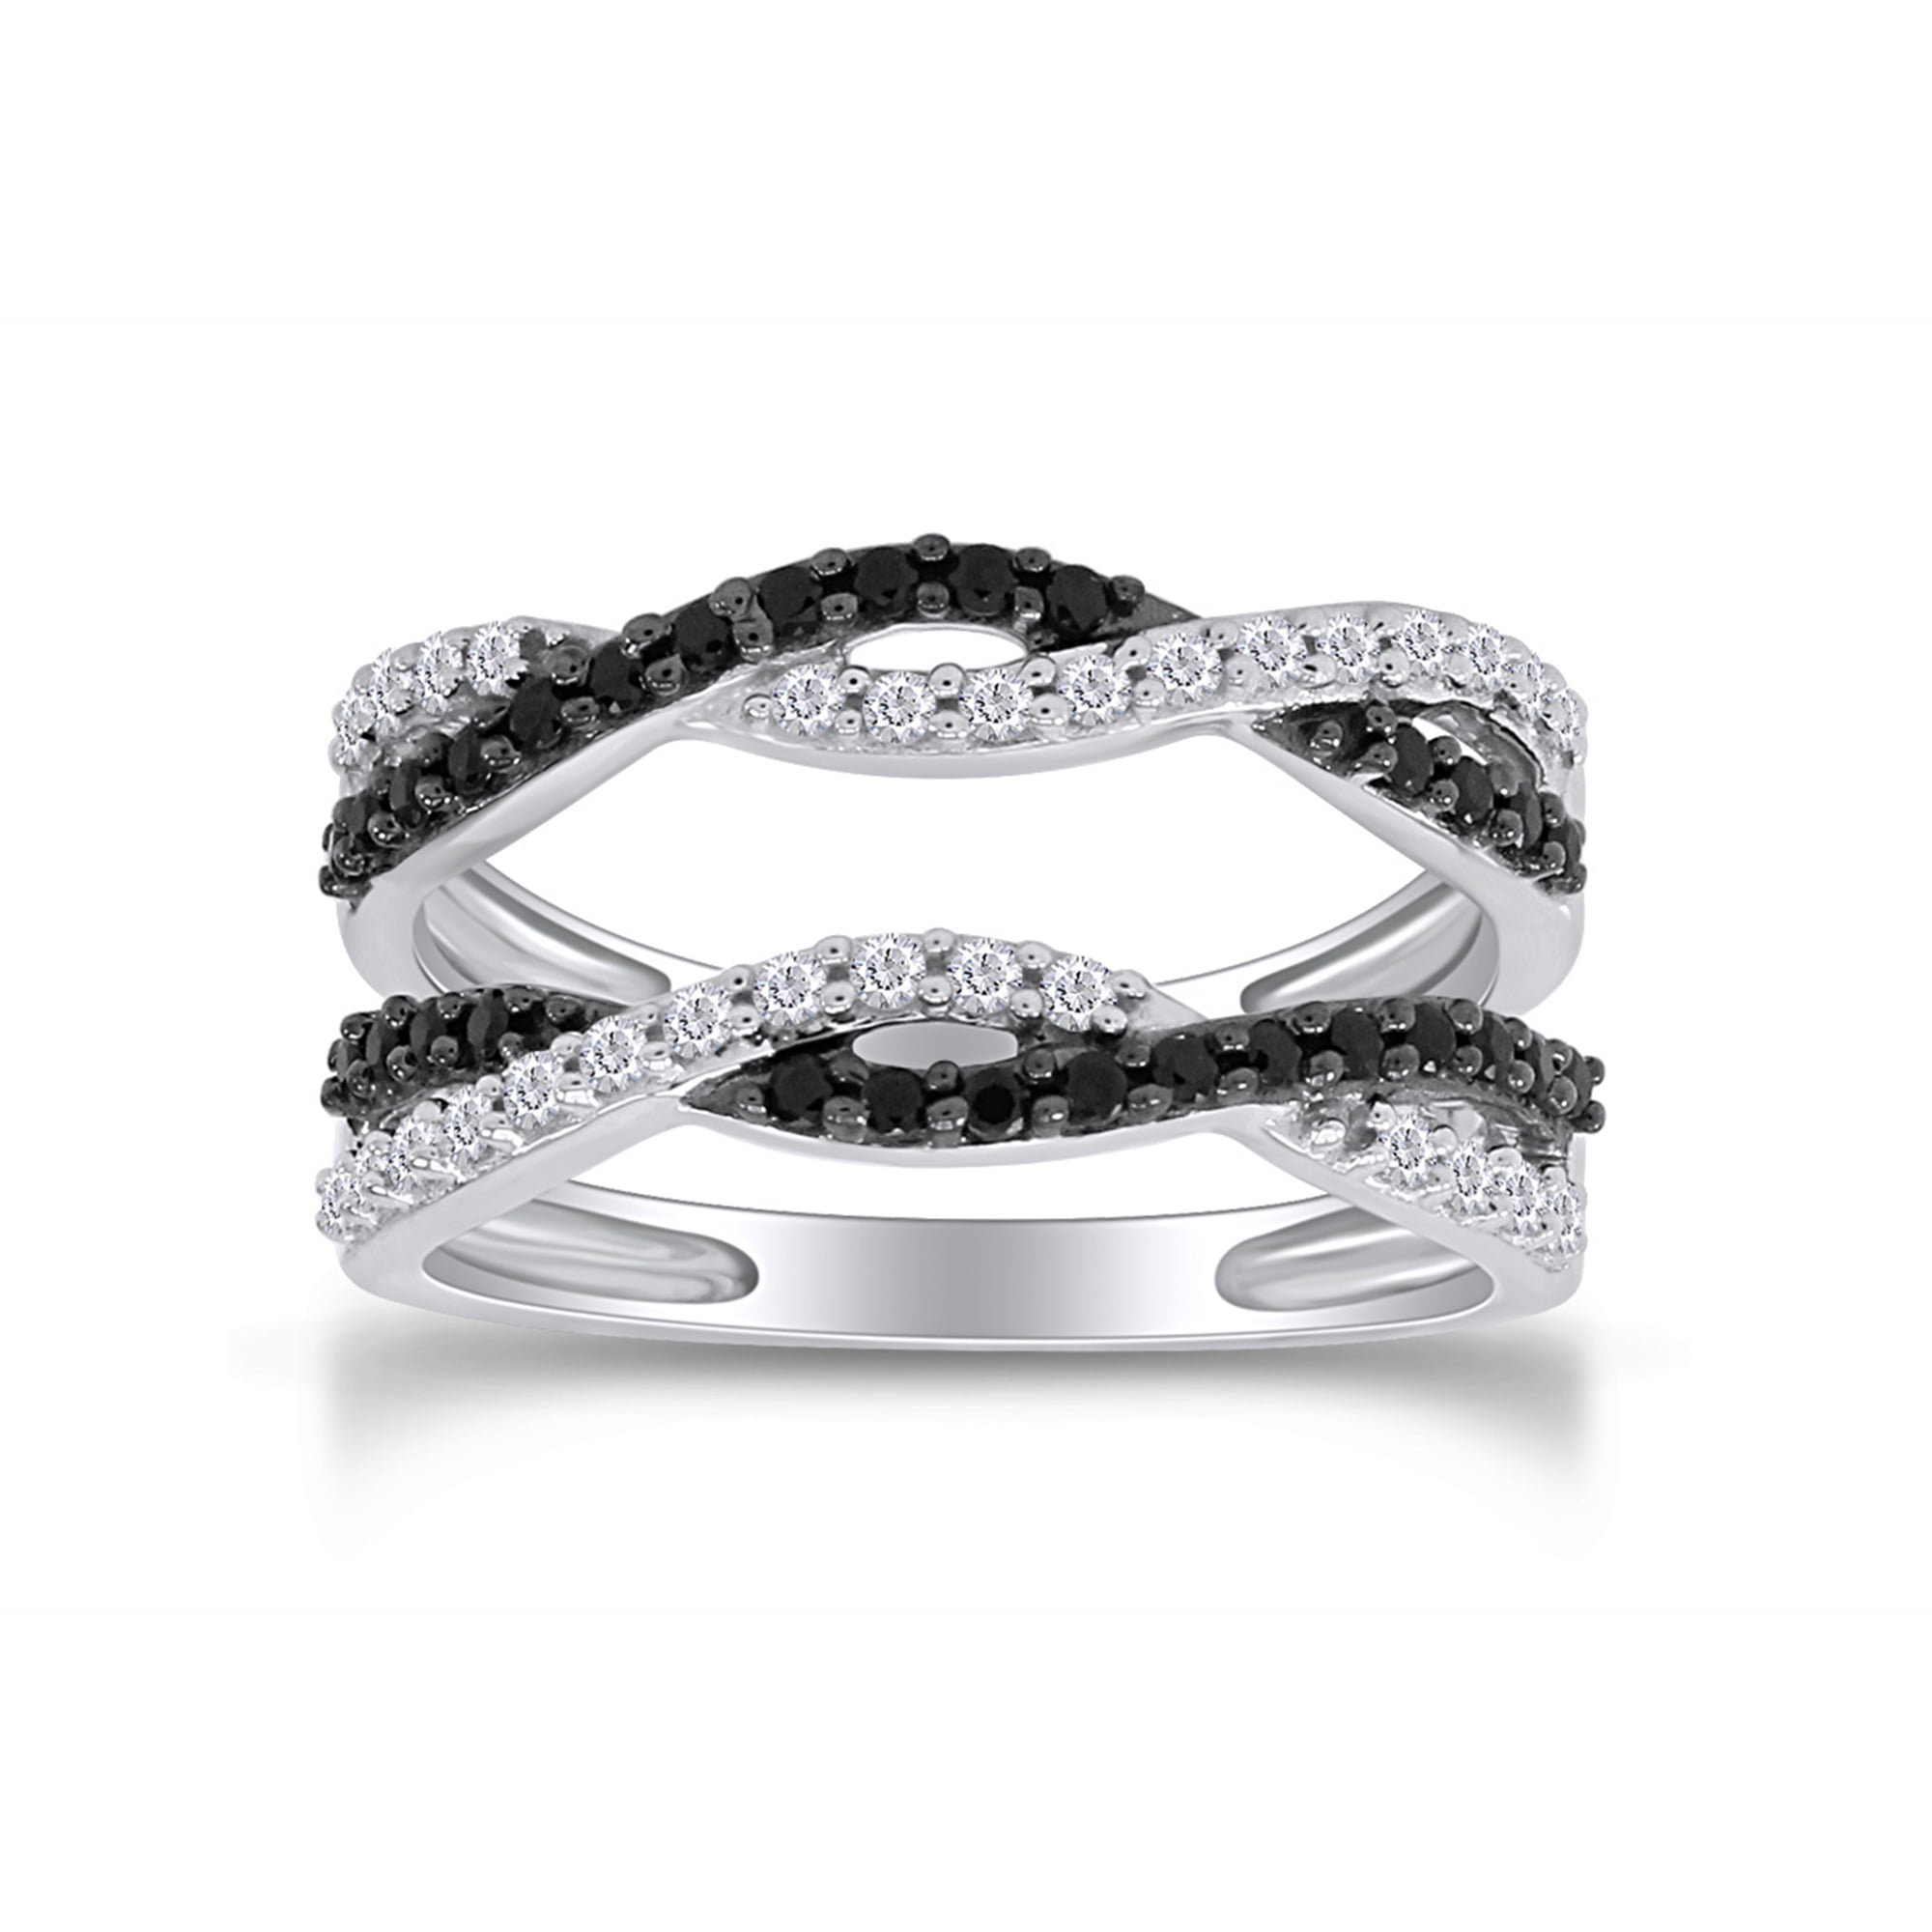 14K White Gold Over Alloy 0.50 ct Round-cut Black CZ Diamond Ring Enhancer Solitaire Ring Guard